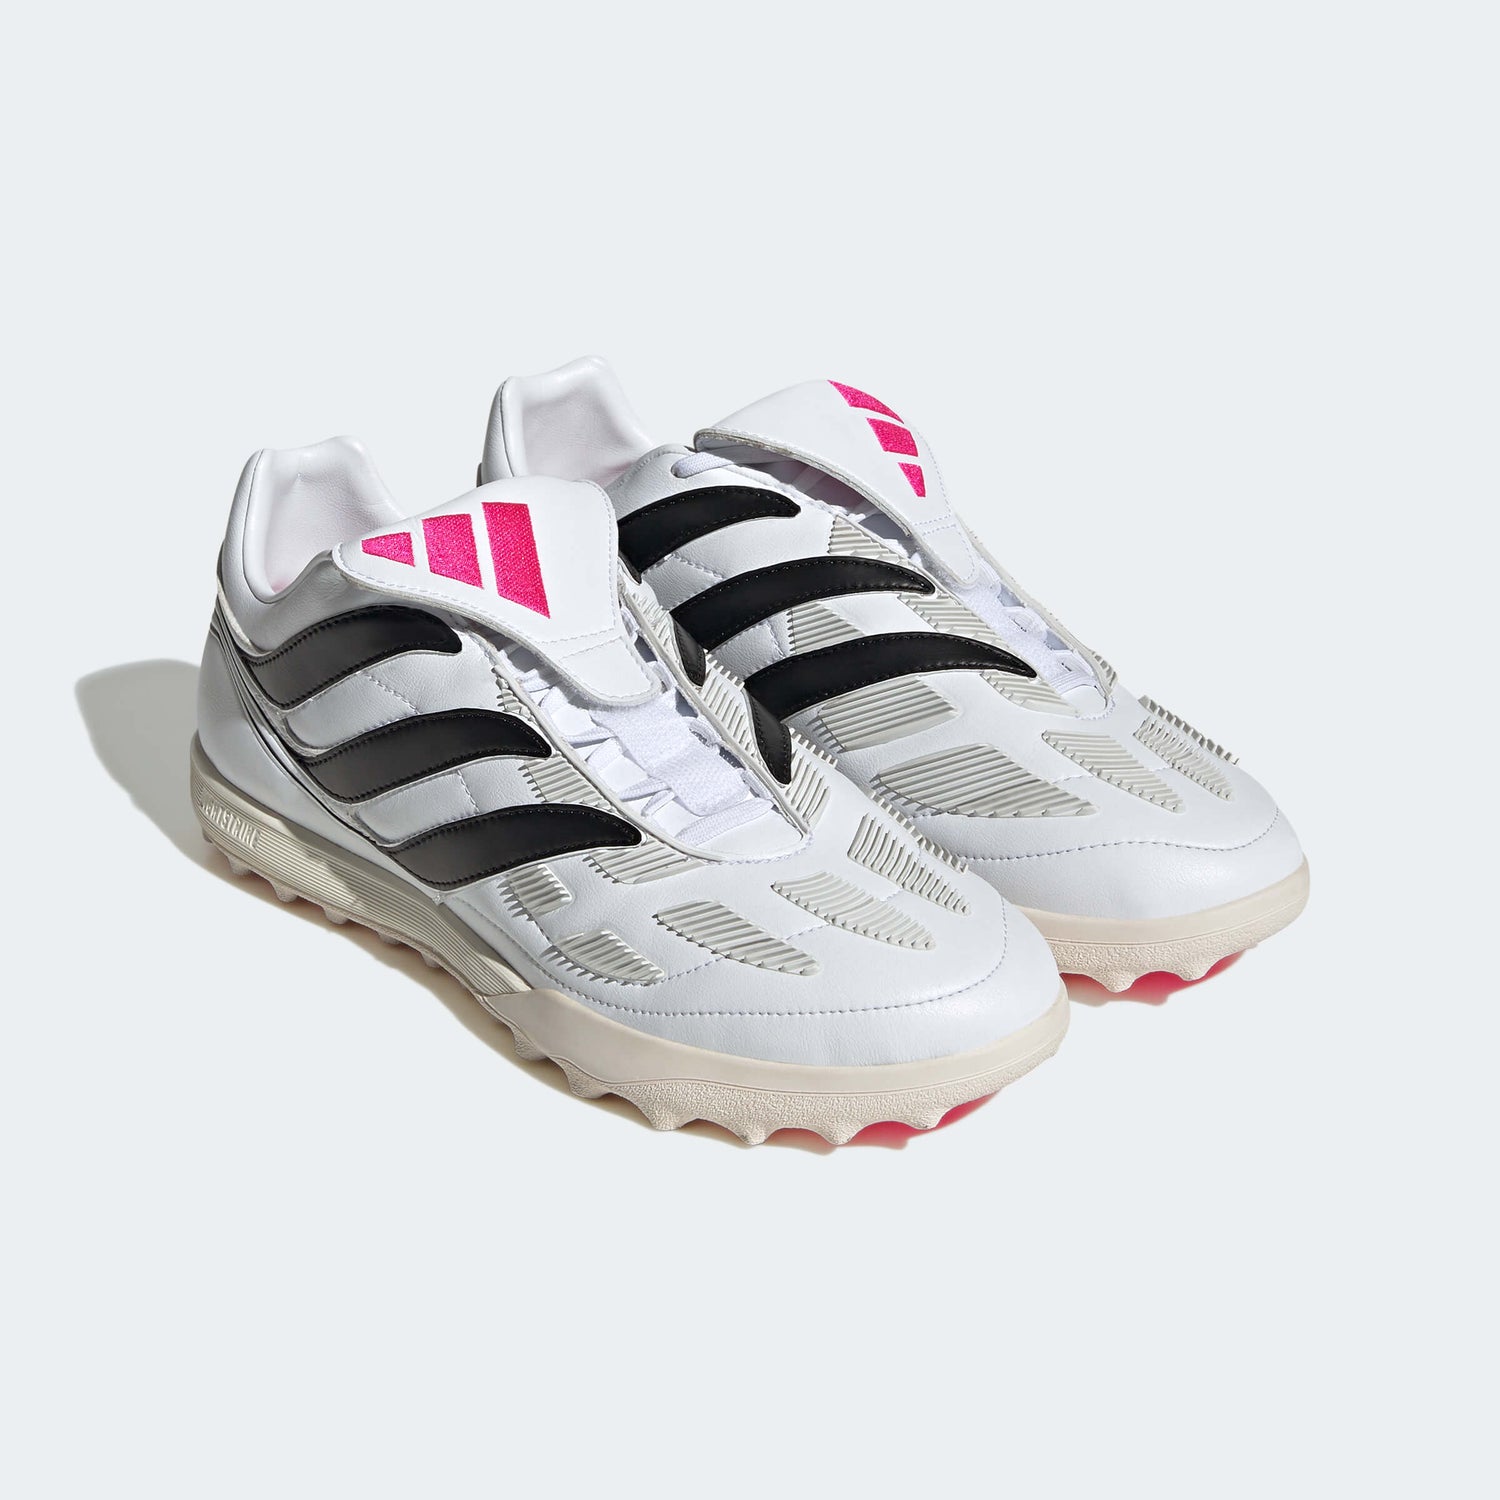 adidas Predator Precision.1 Turf - Predator Archive Pack (SP23) (Pair - Front Lateral)